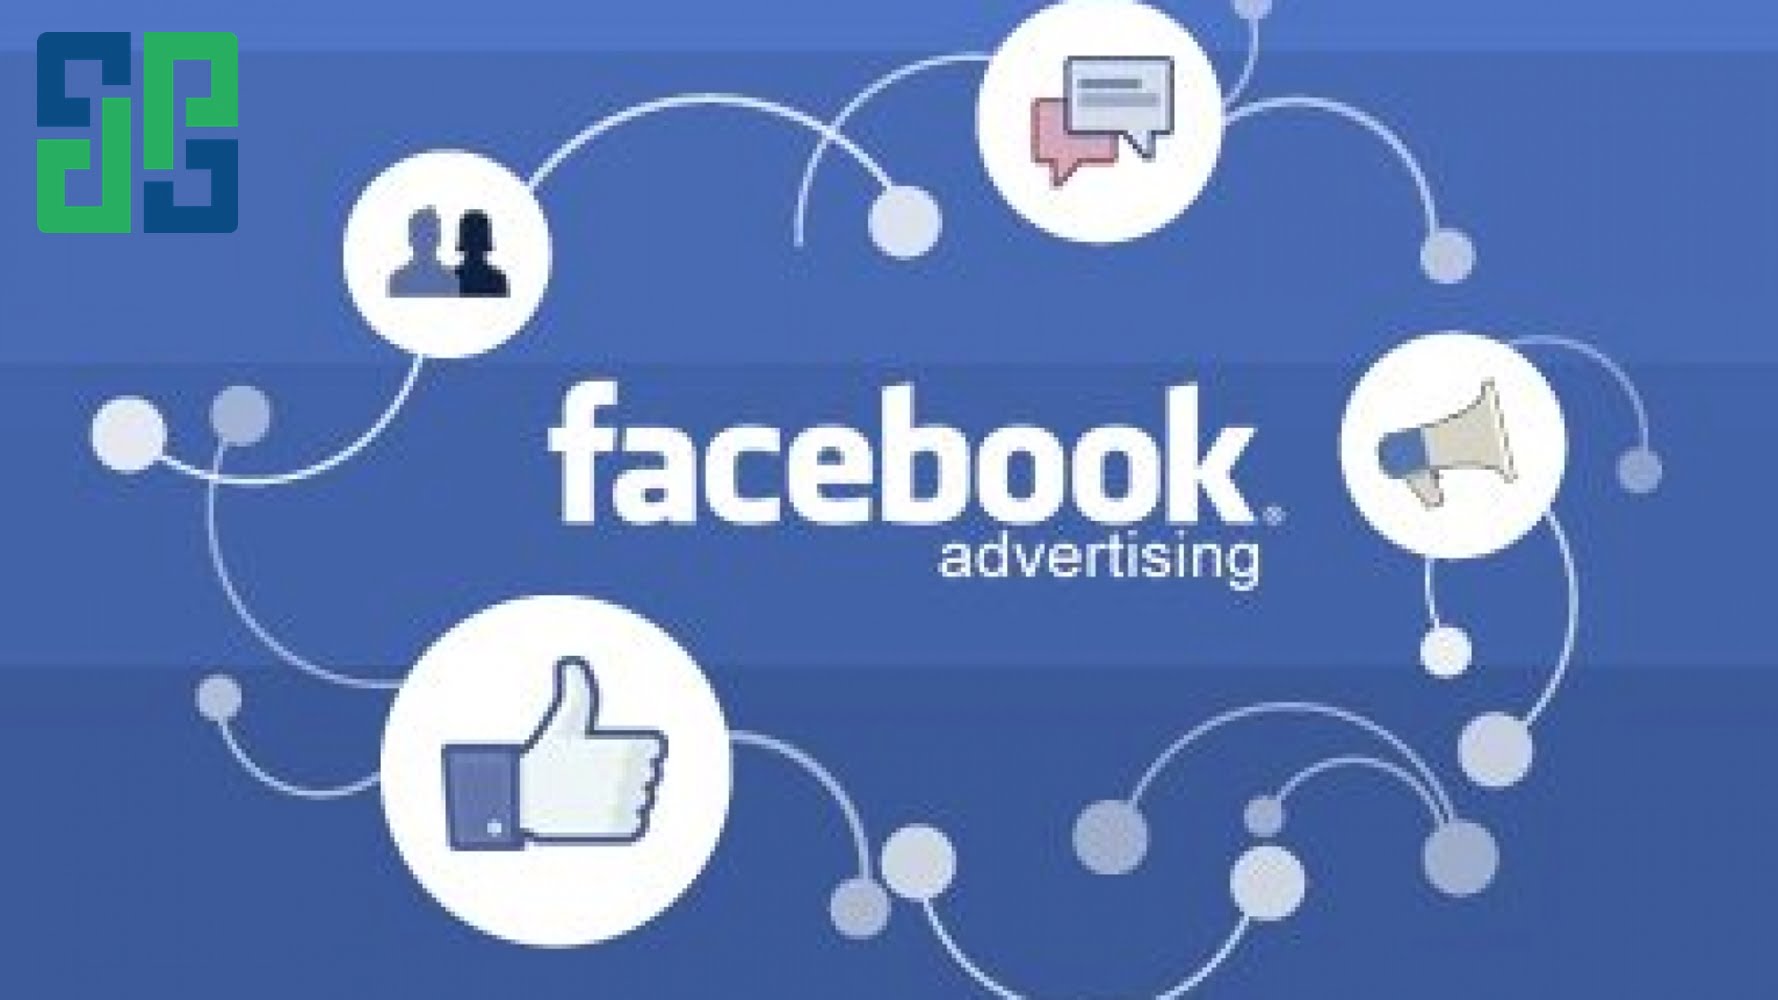 Today's Most Reputable Facebook Advertising Company